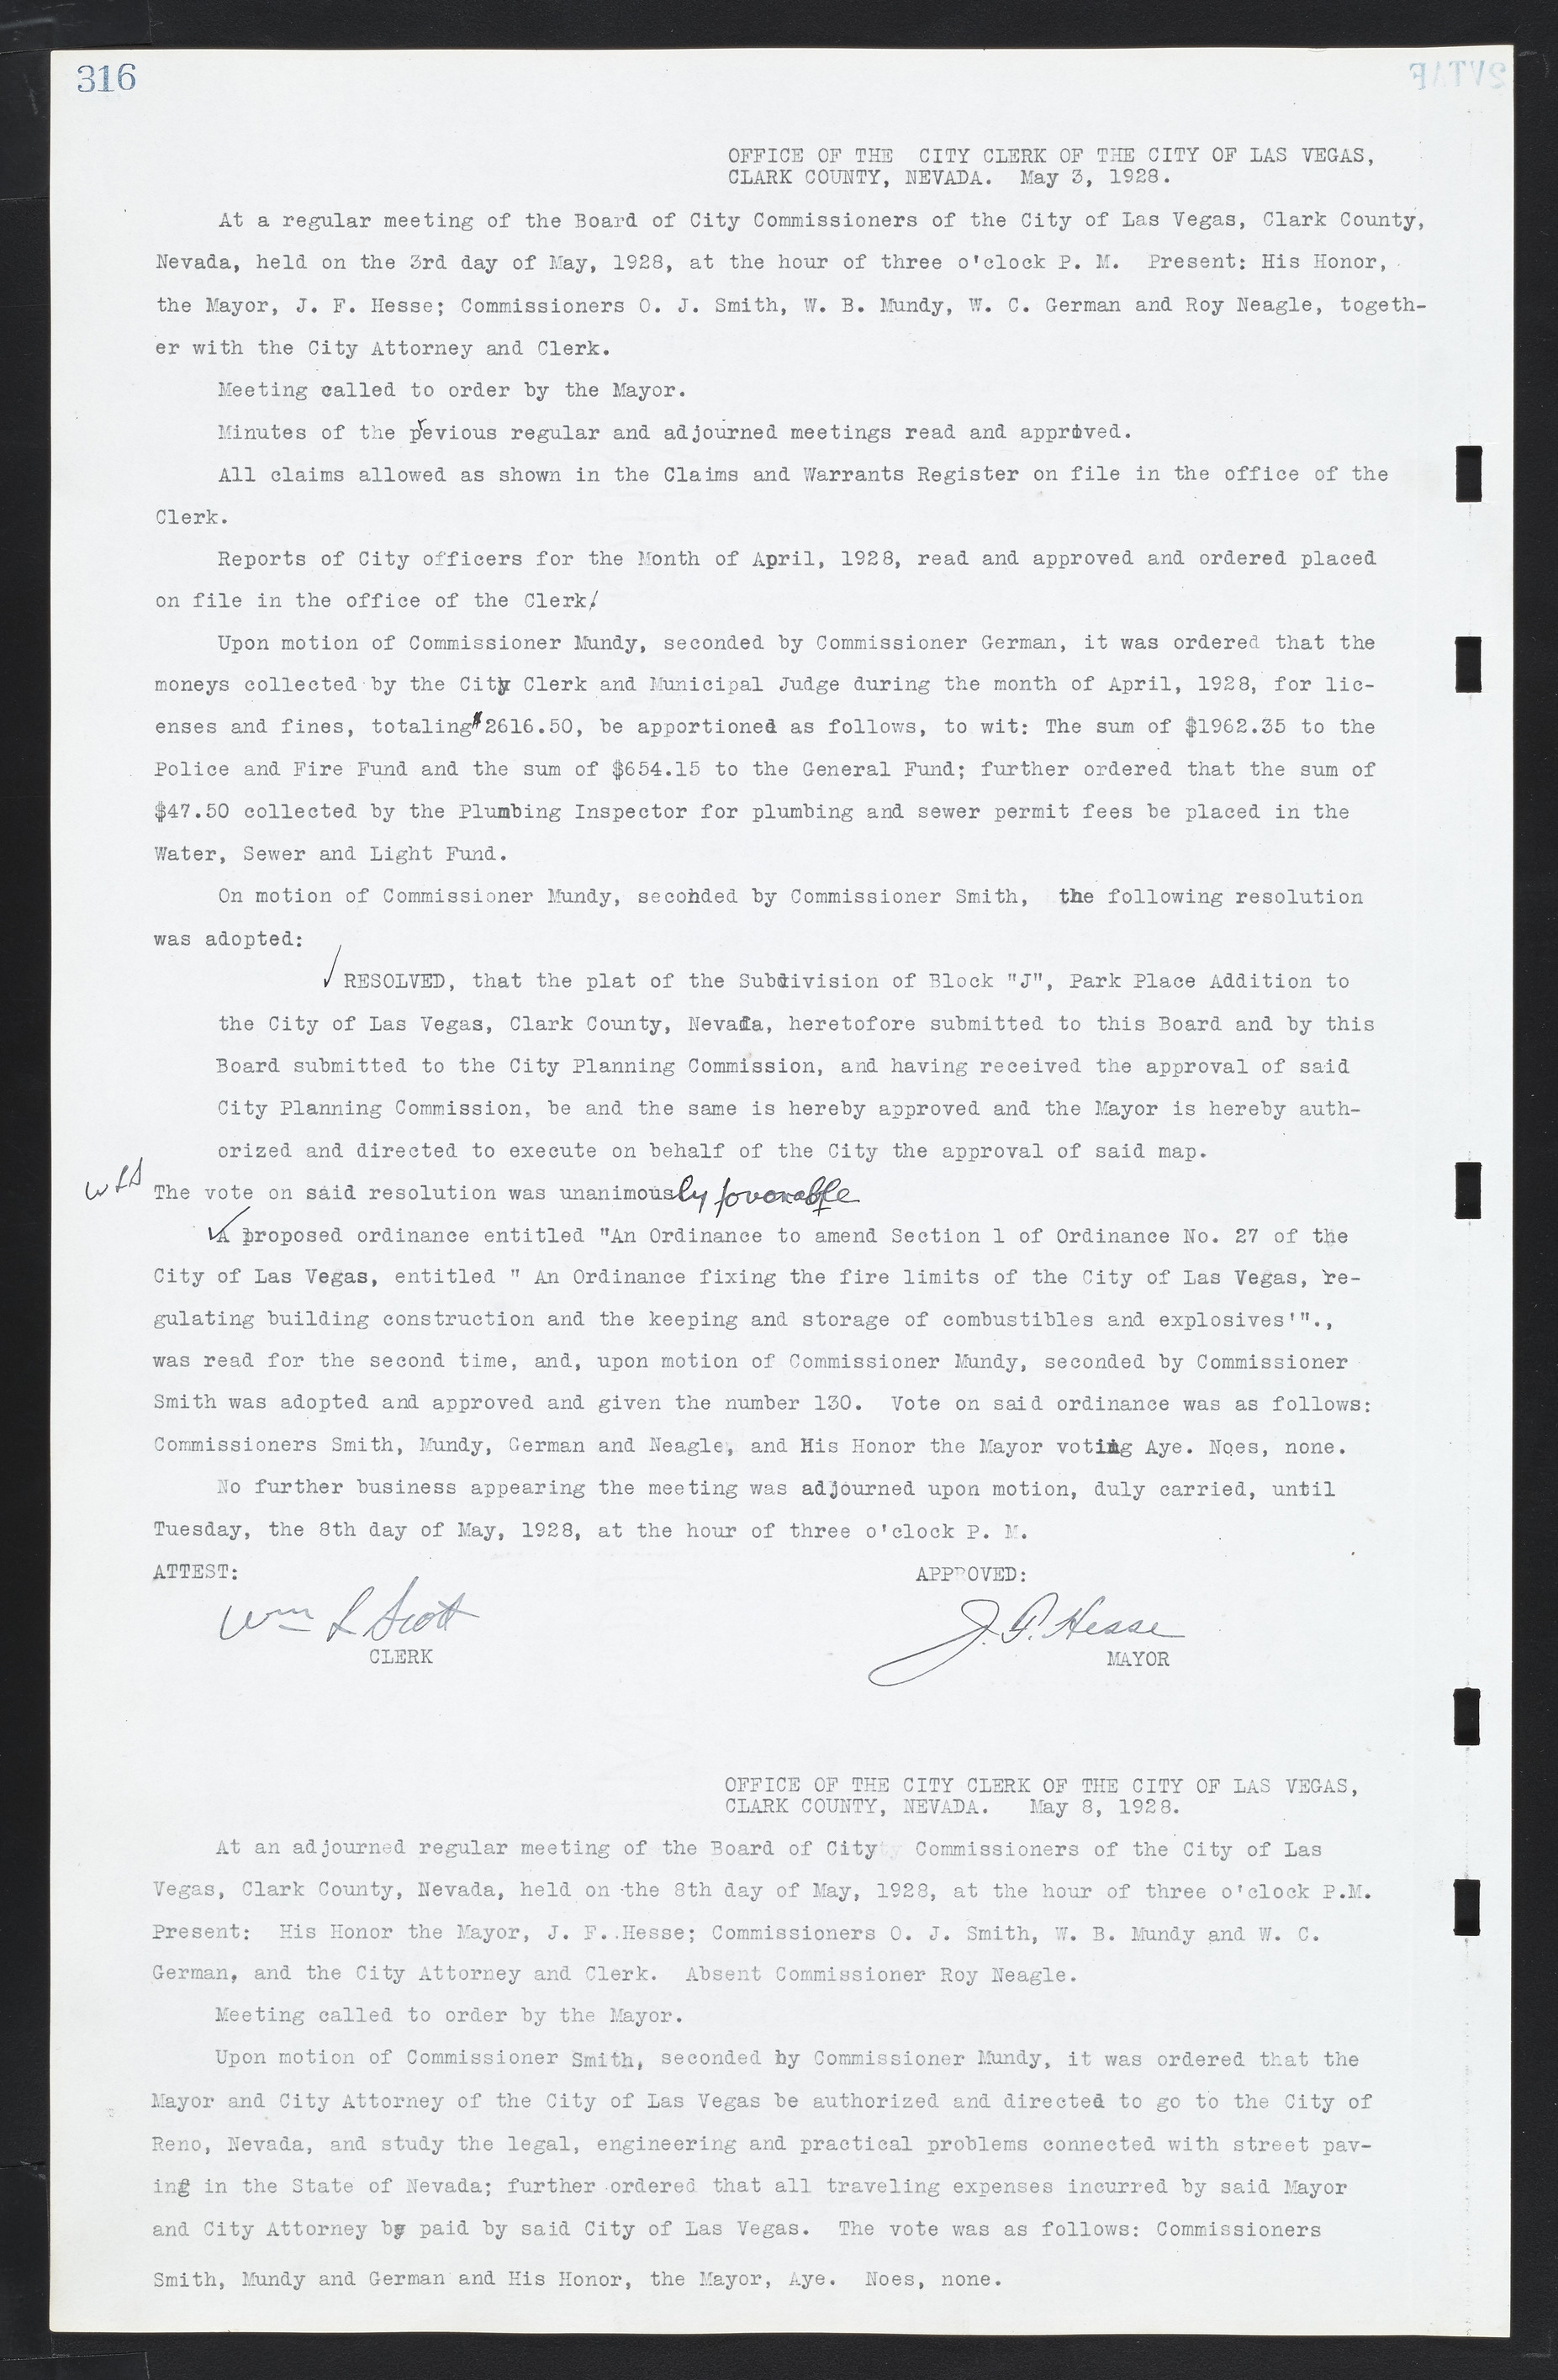 Las Vegas City Commission Minutes, March 1, 1922 to May 10, 1929, lvc000002-325